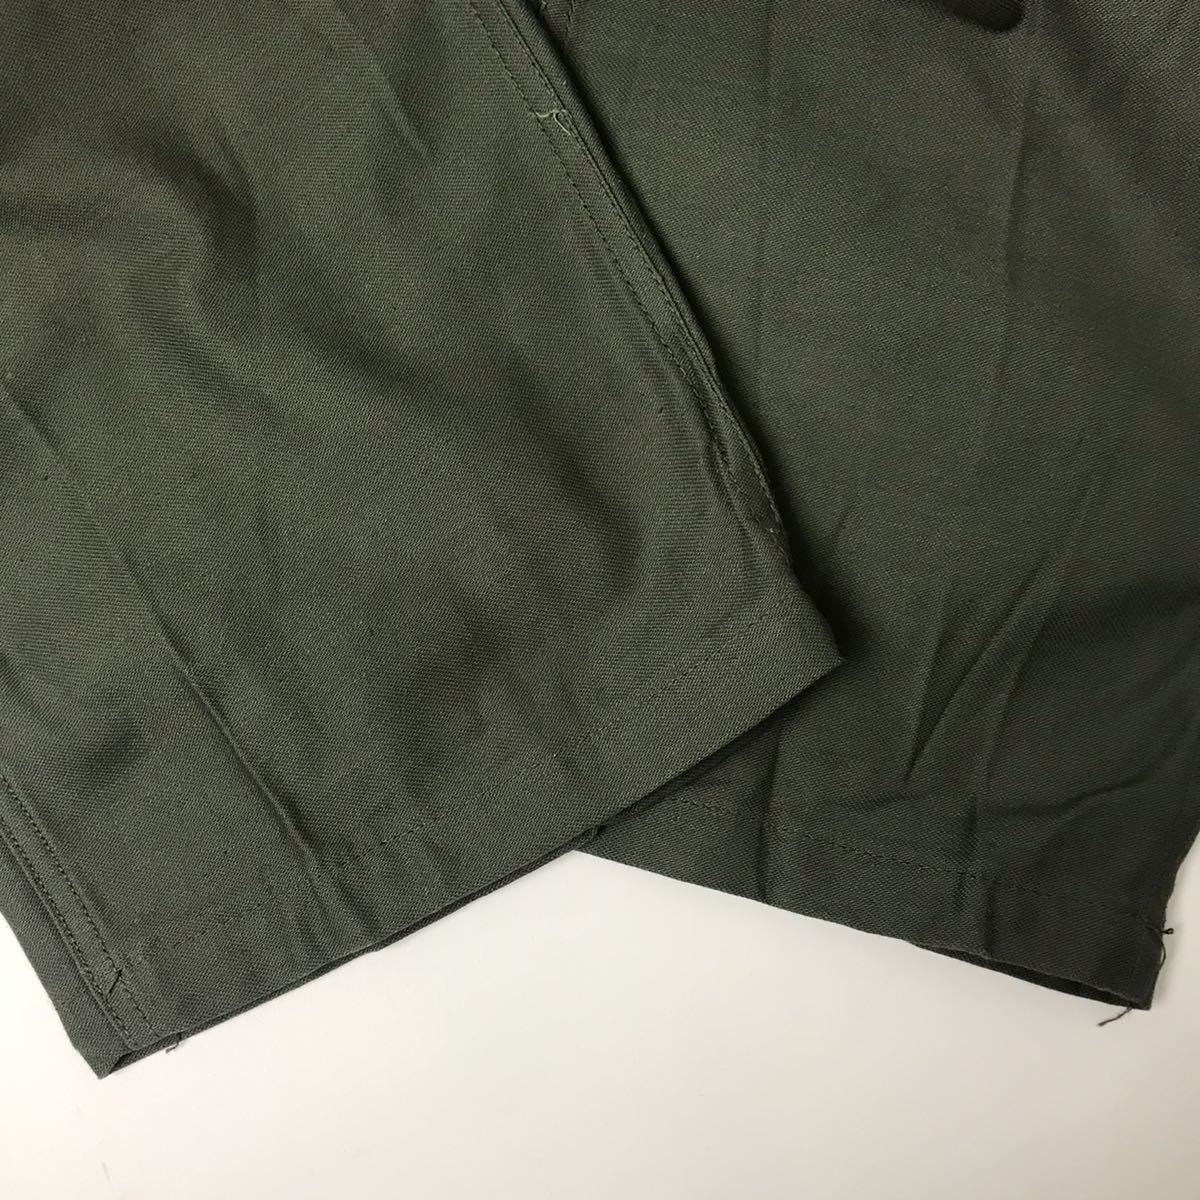 50s60s70s Vintage military the US armed forces the truth thing OG-107 cotton satin Baker pants 36/33 dead stock 